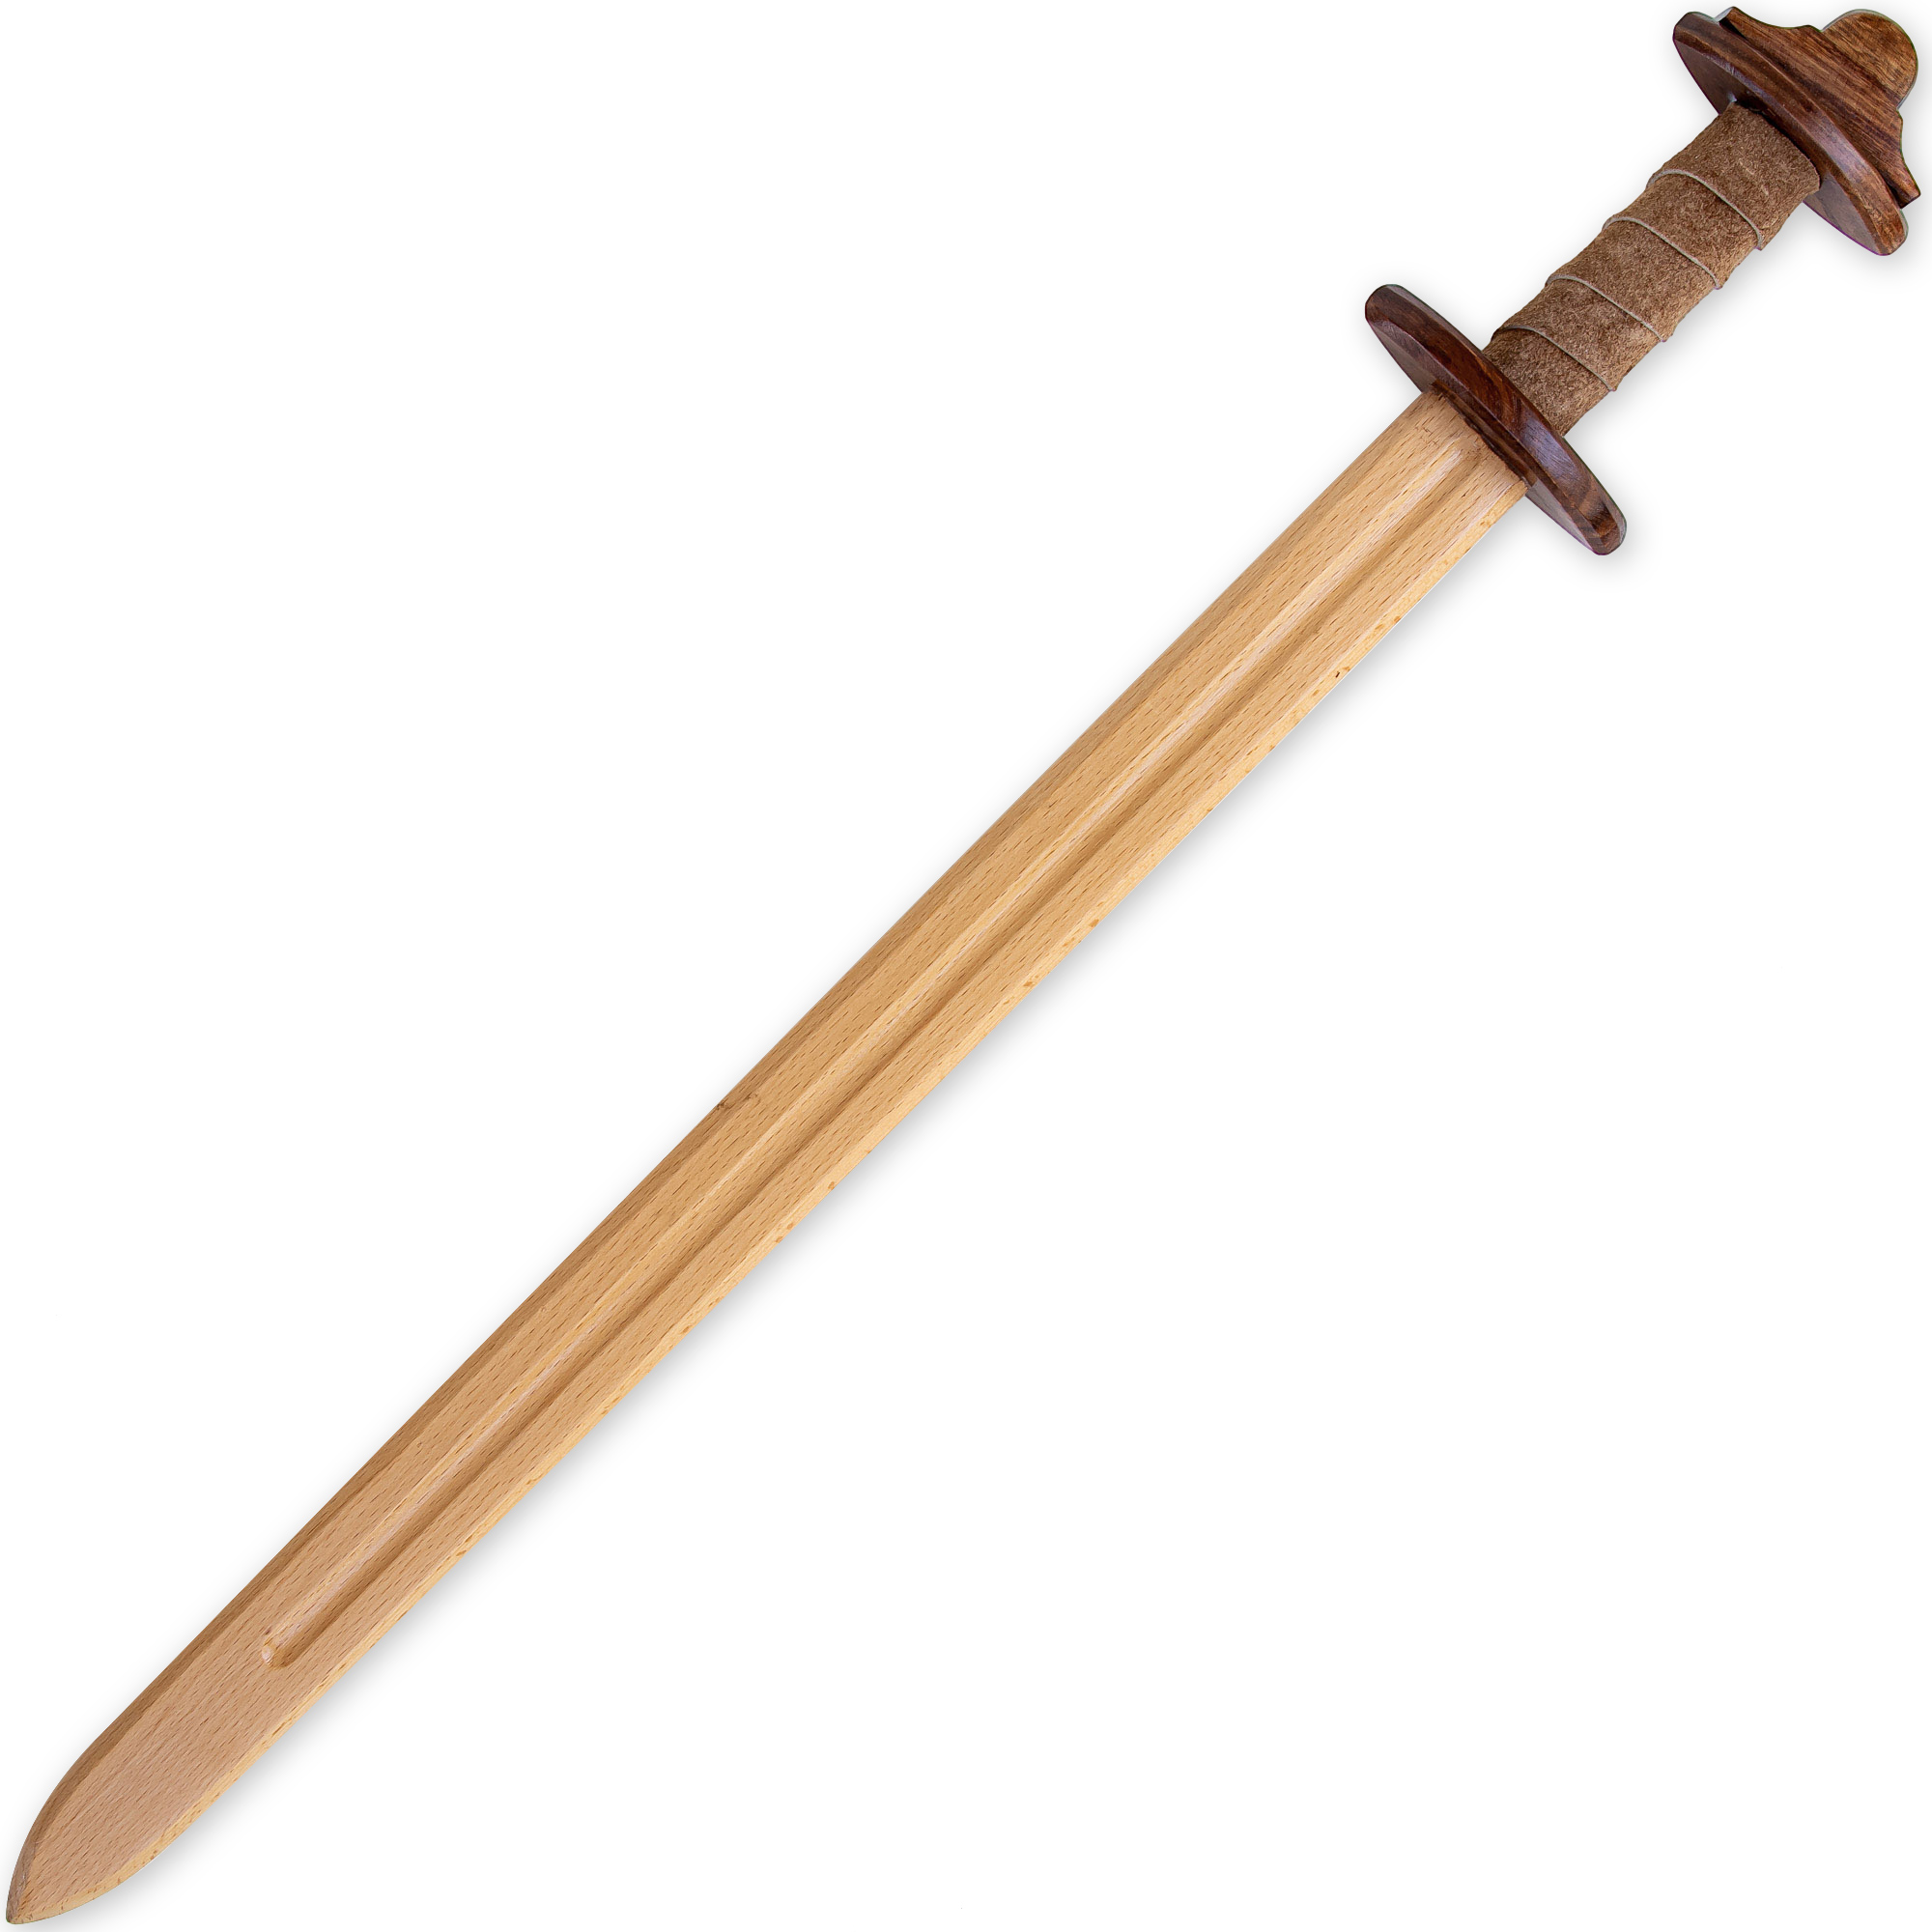 Steamed Beech Wood Practice Viking SWORD | Lobed Pommel & Brown Leather Wrapped Handle